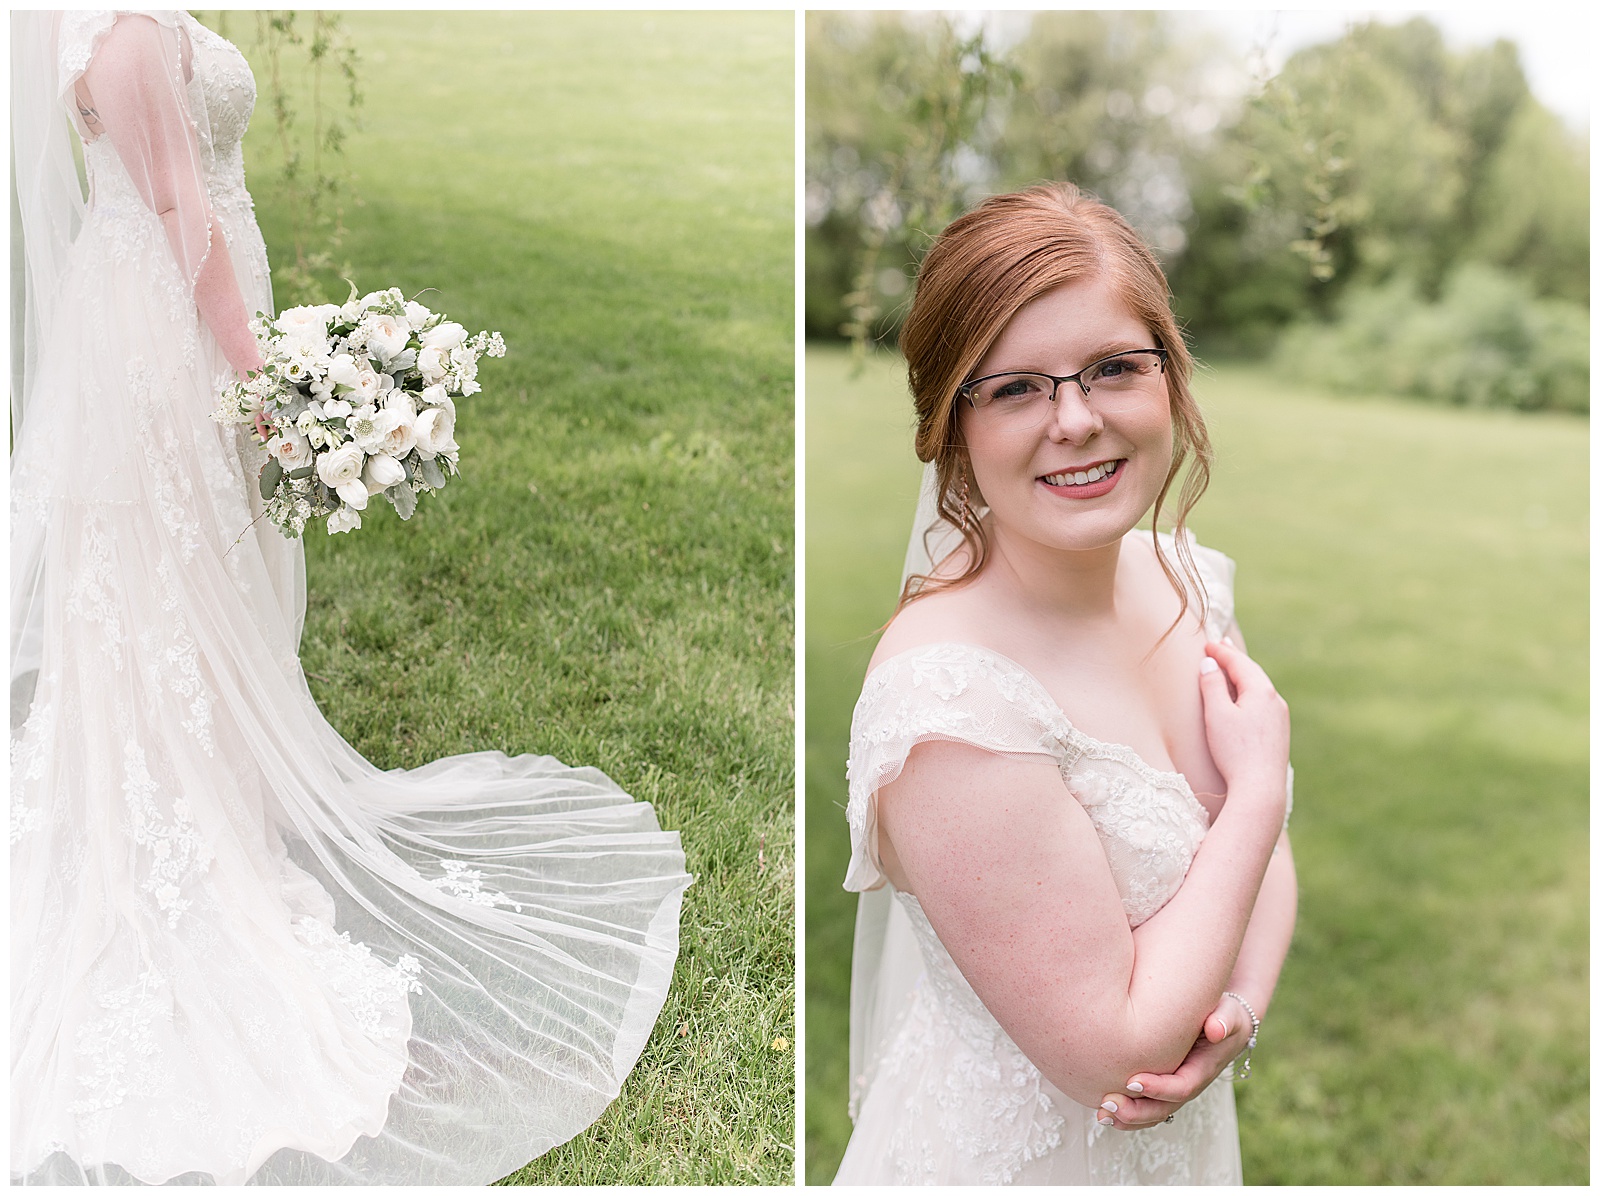 bride poses for camera with arms crossed and smiling in grass lawn on spring day